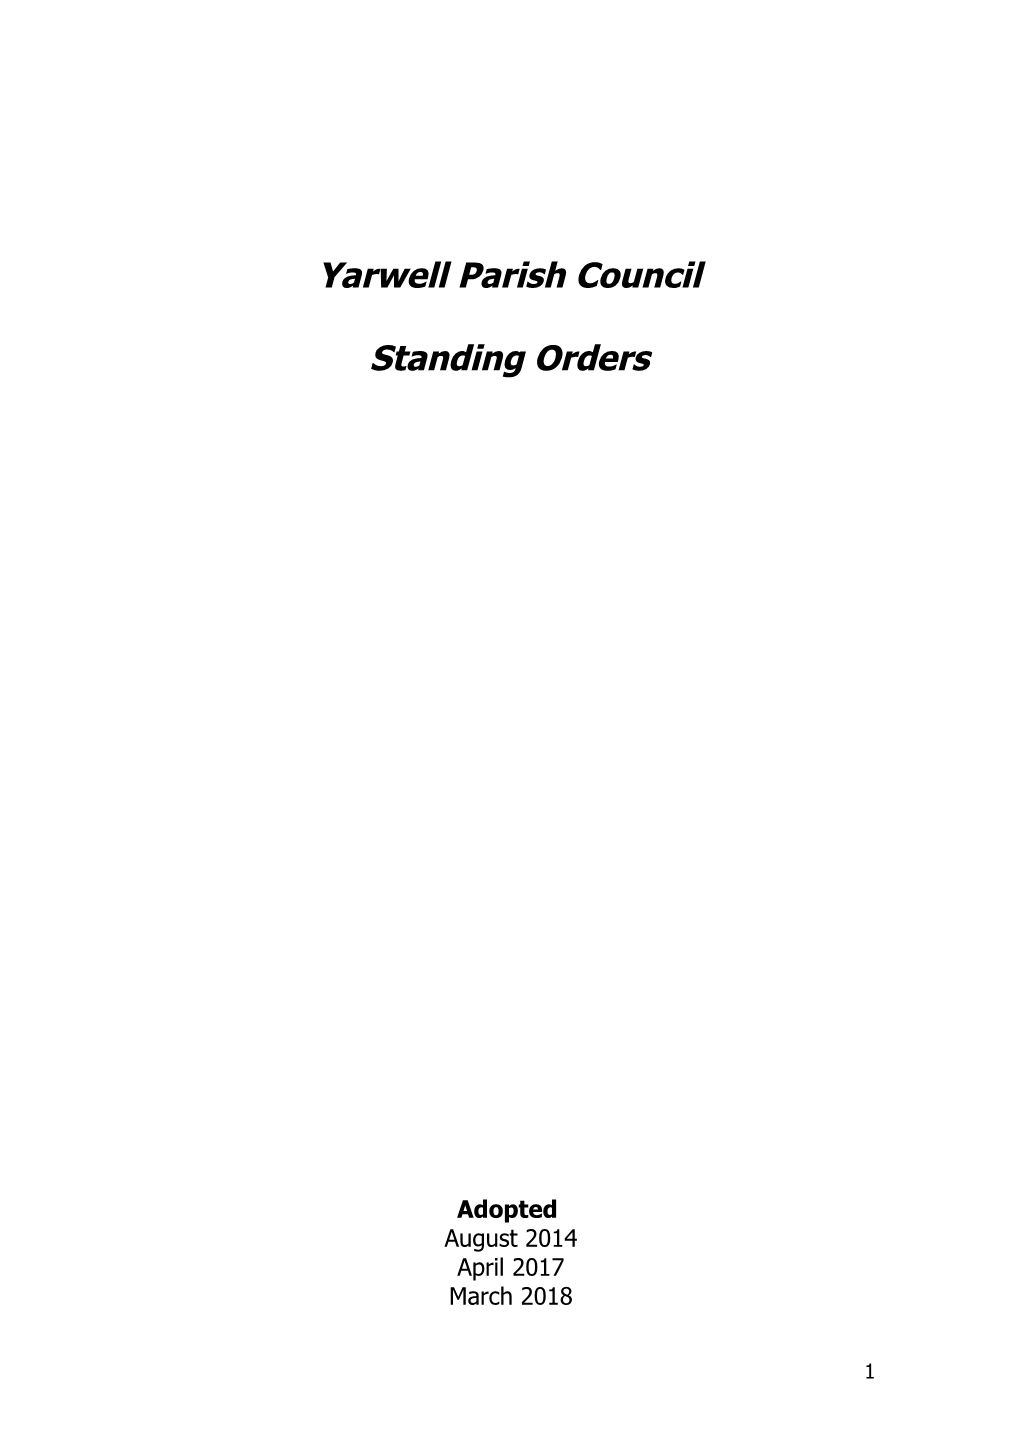 Standing Orders for Yarwell Parish Council